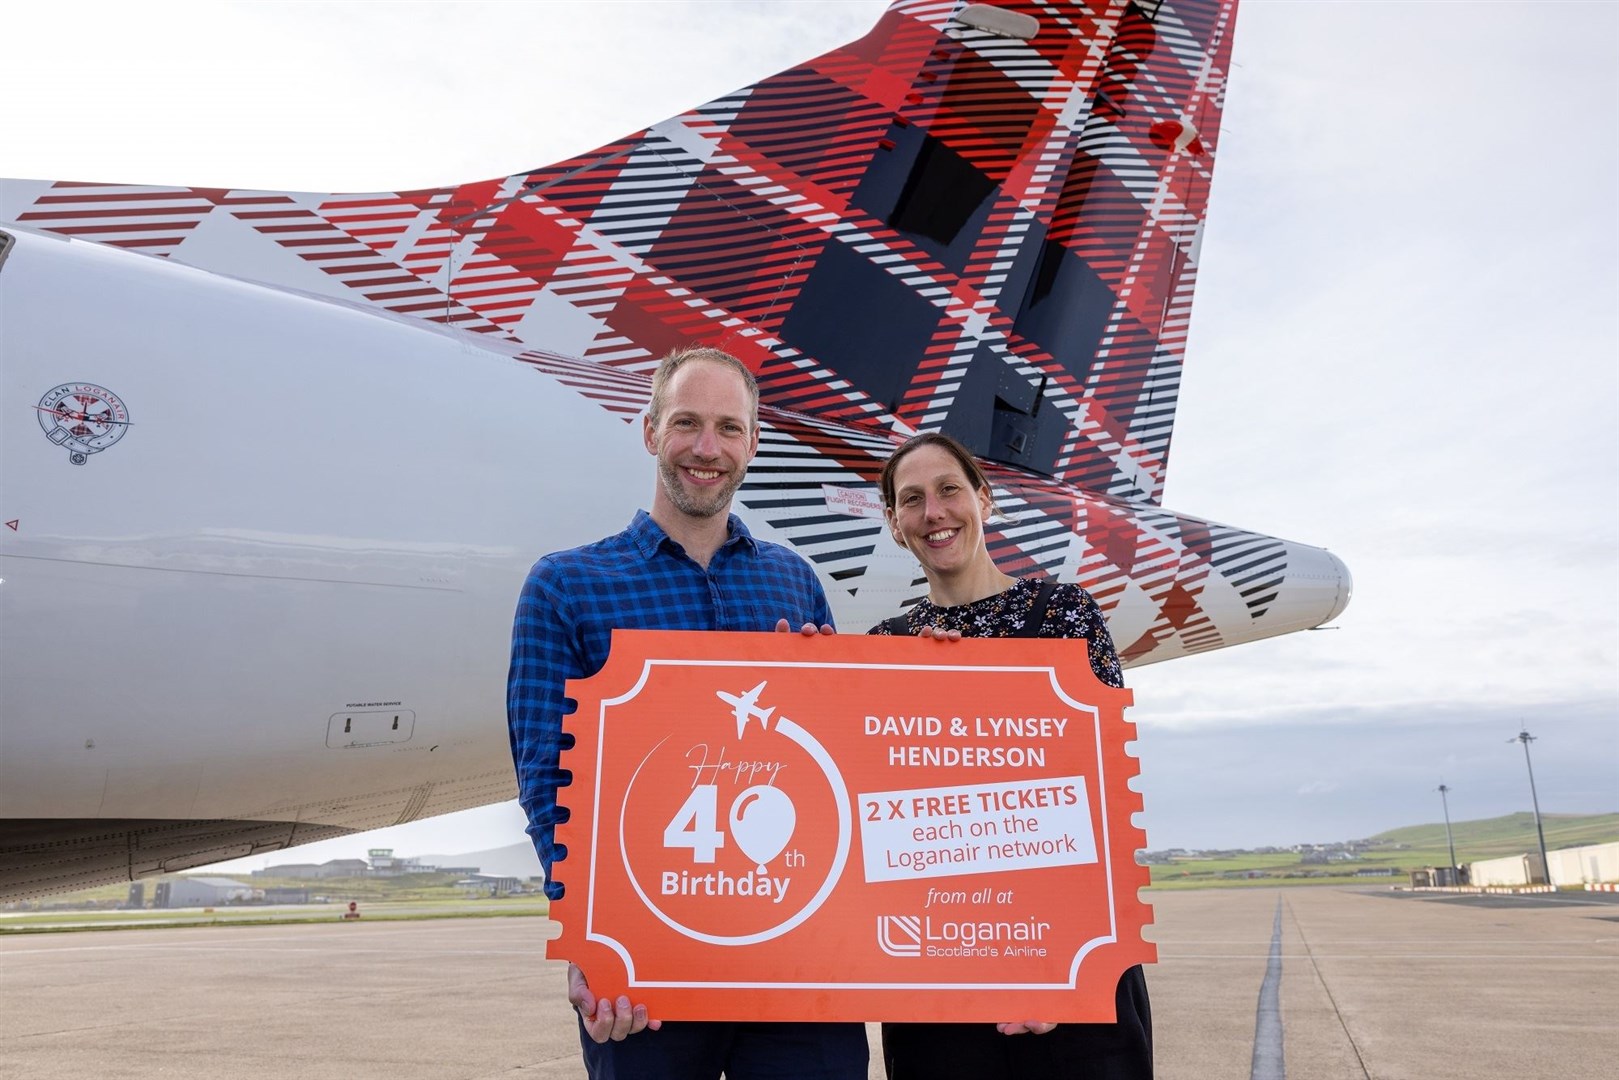 Twins David and Lynsey Henderson receiving 40th birthday wishes from Loganair.